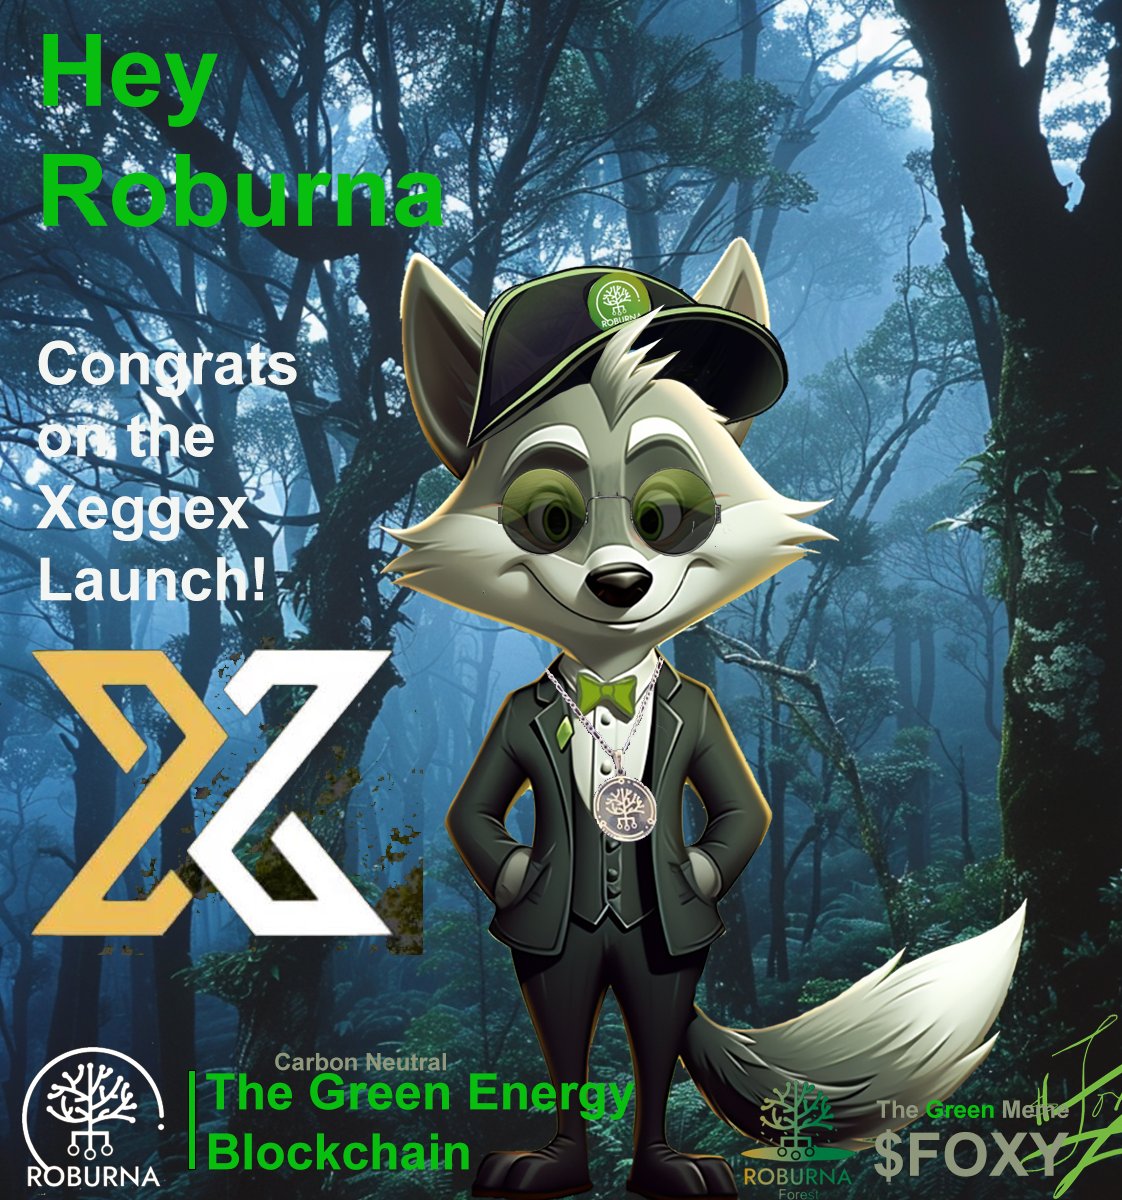 Congratulations to @RoburnaOfficial on the launch of the first CEX, the first of many I'm sure, super exciting!!!  #GreenBlockchain #RBA #DeFi #Crypto #CryptoJourney #1000XGem $FOXY #WSM @RoburnaForest